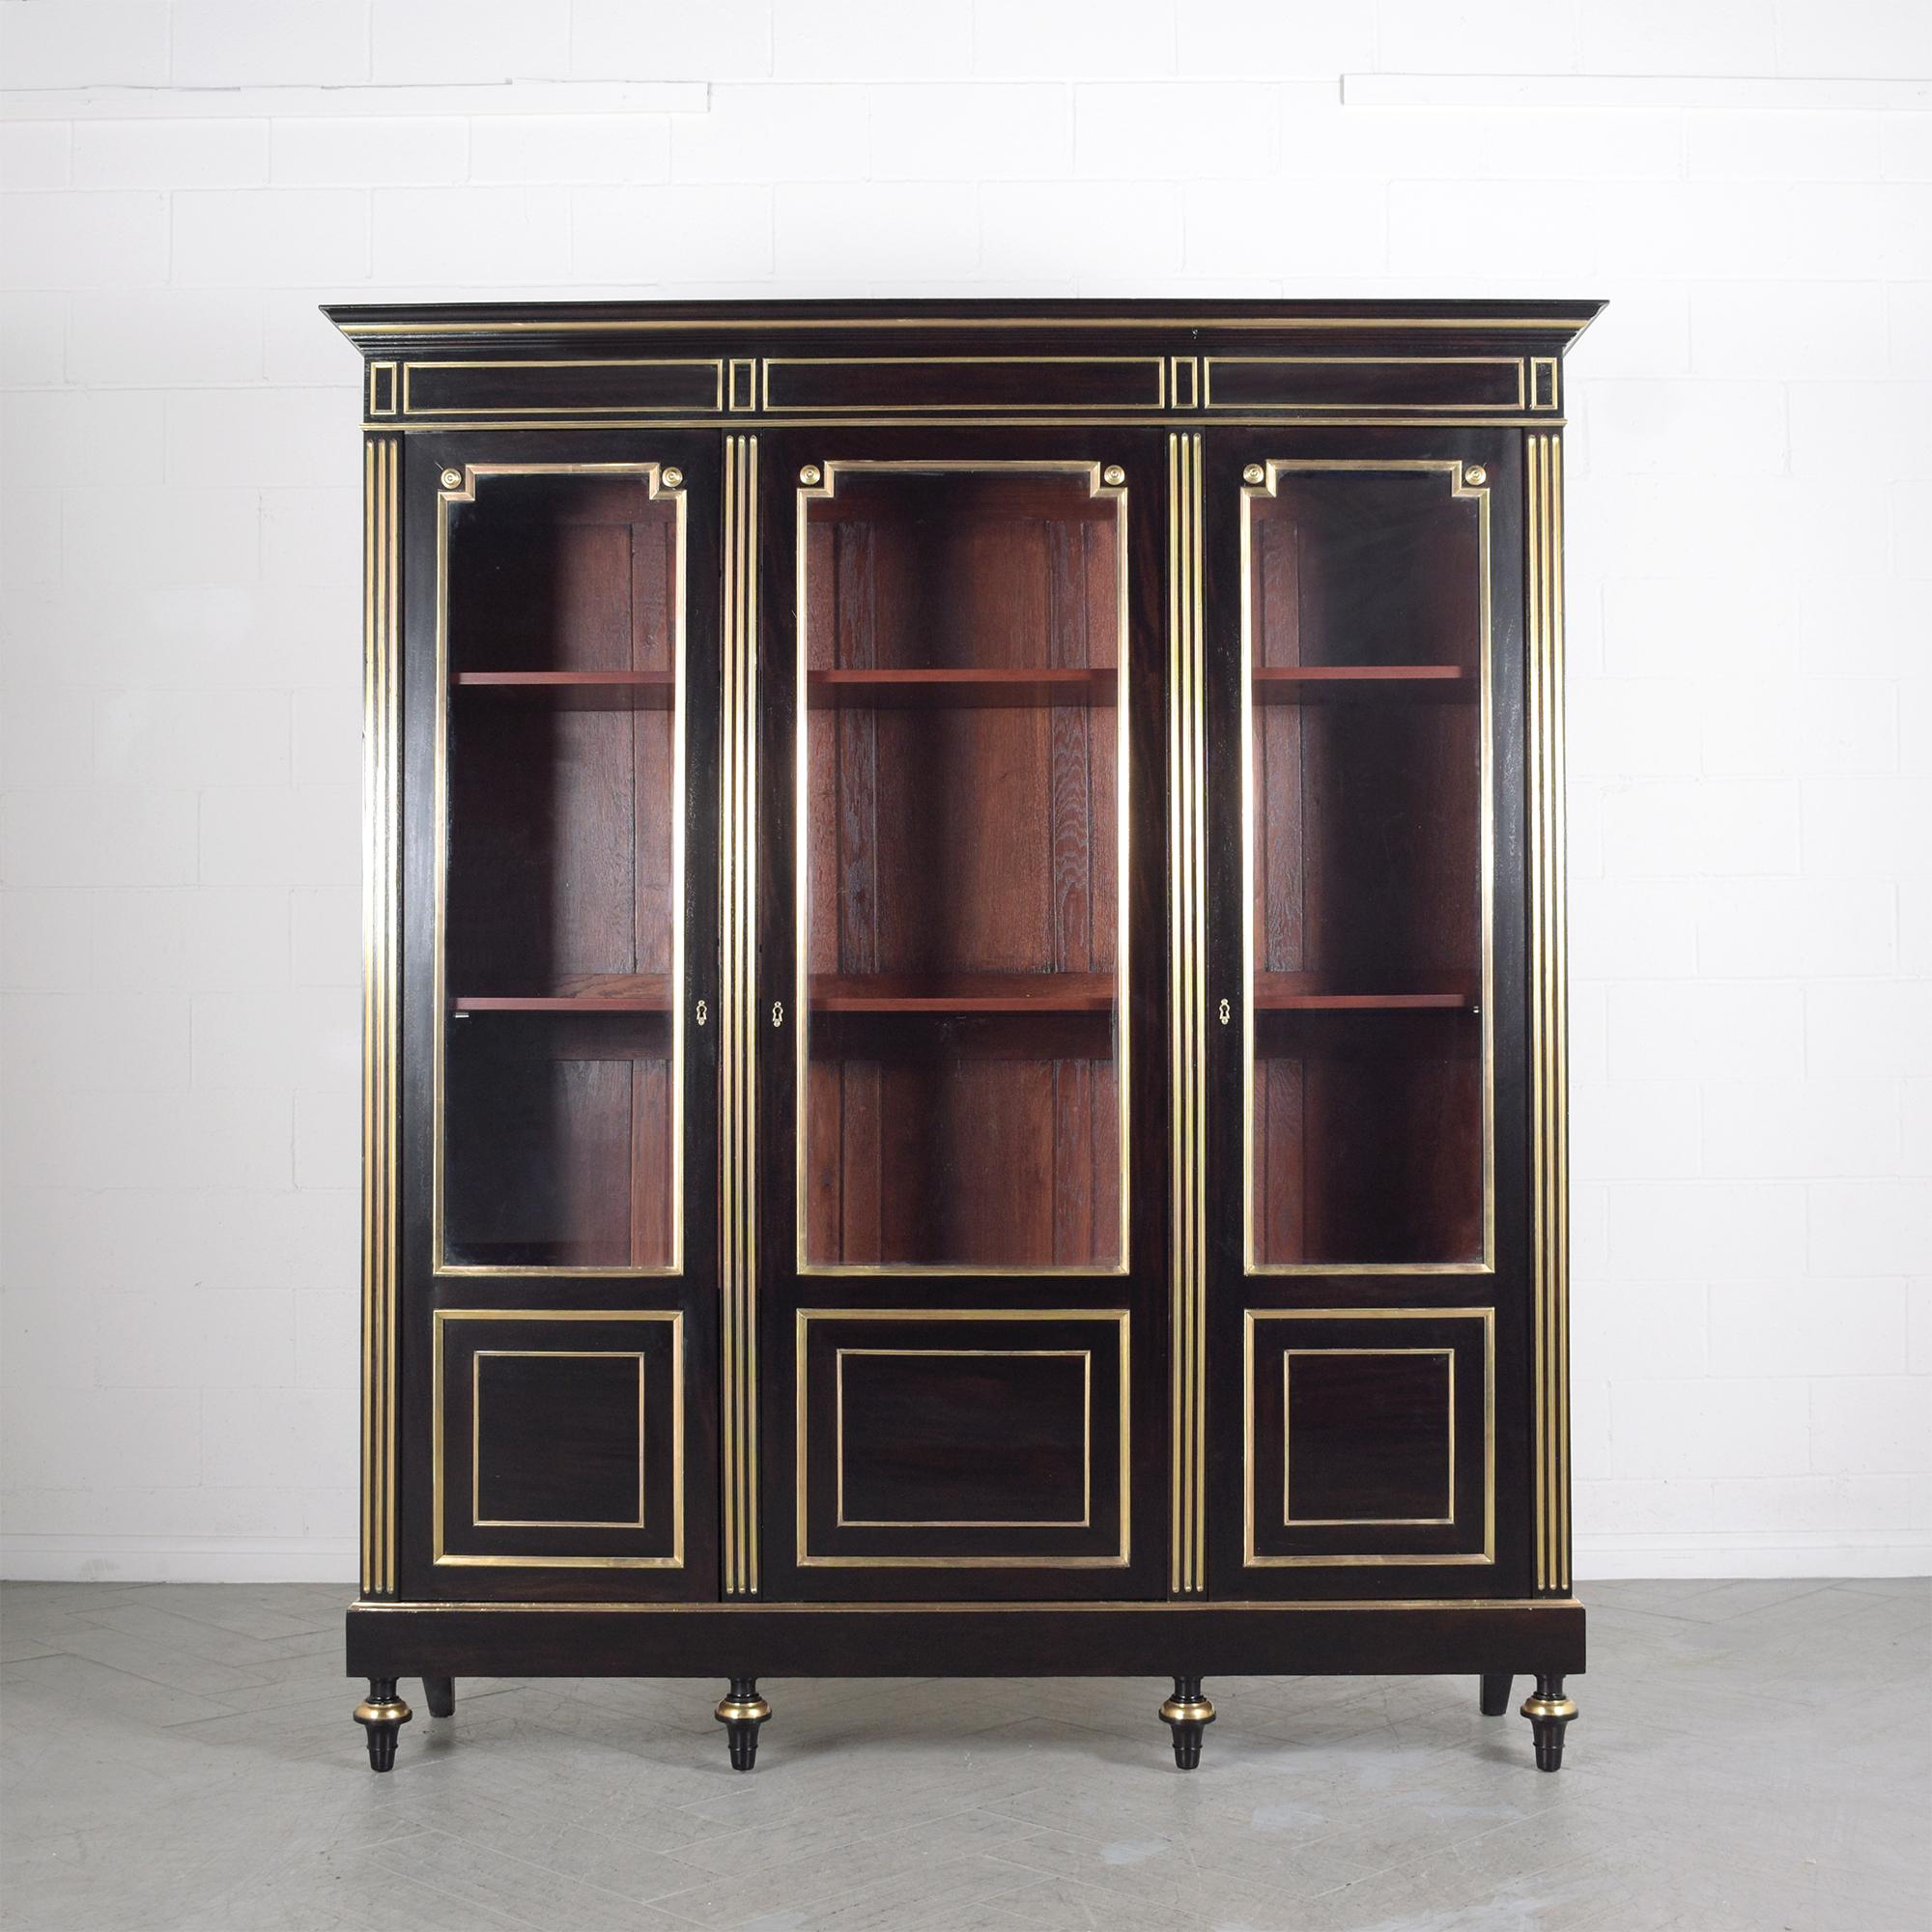 Immerse yourself in the grandeur of French elegance with our stunning antique 1870s Louis XVI bookcase. Handcrafted from the finest mahogany wood, this piece has been lovingly restored by our expert craftsmen to its original splendor, now radiating